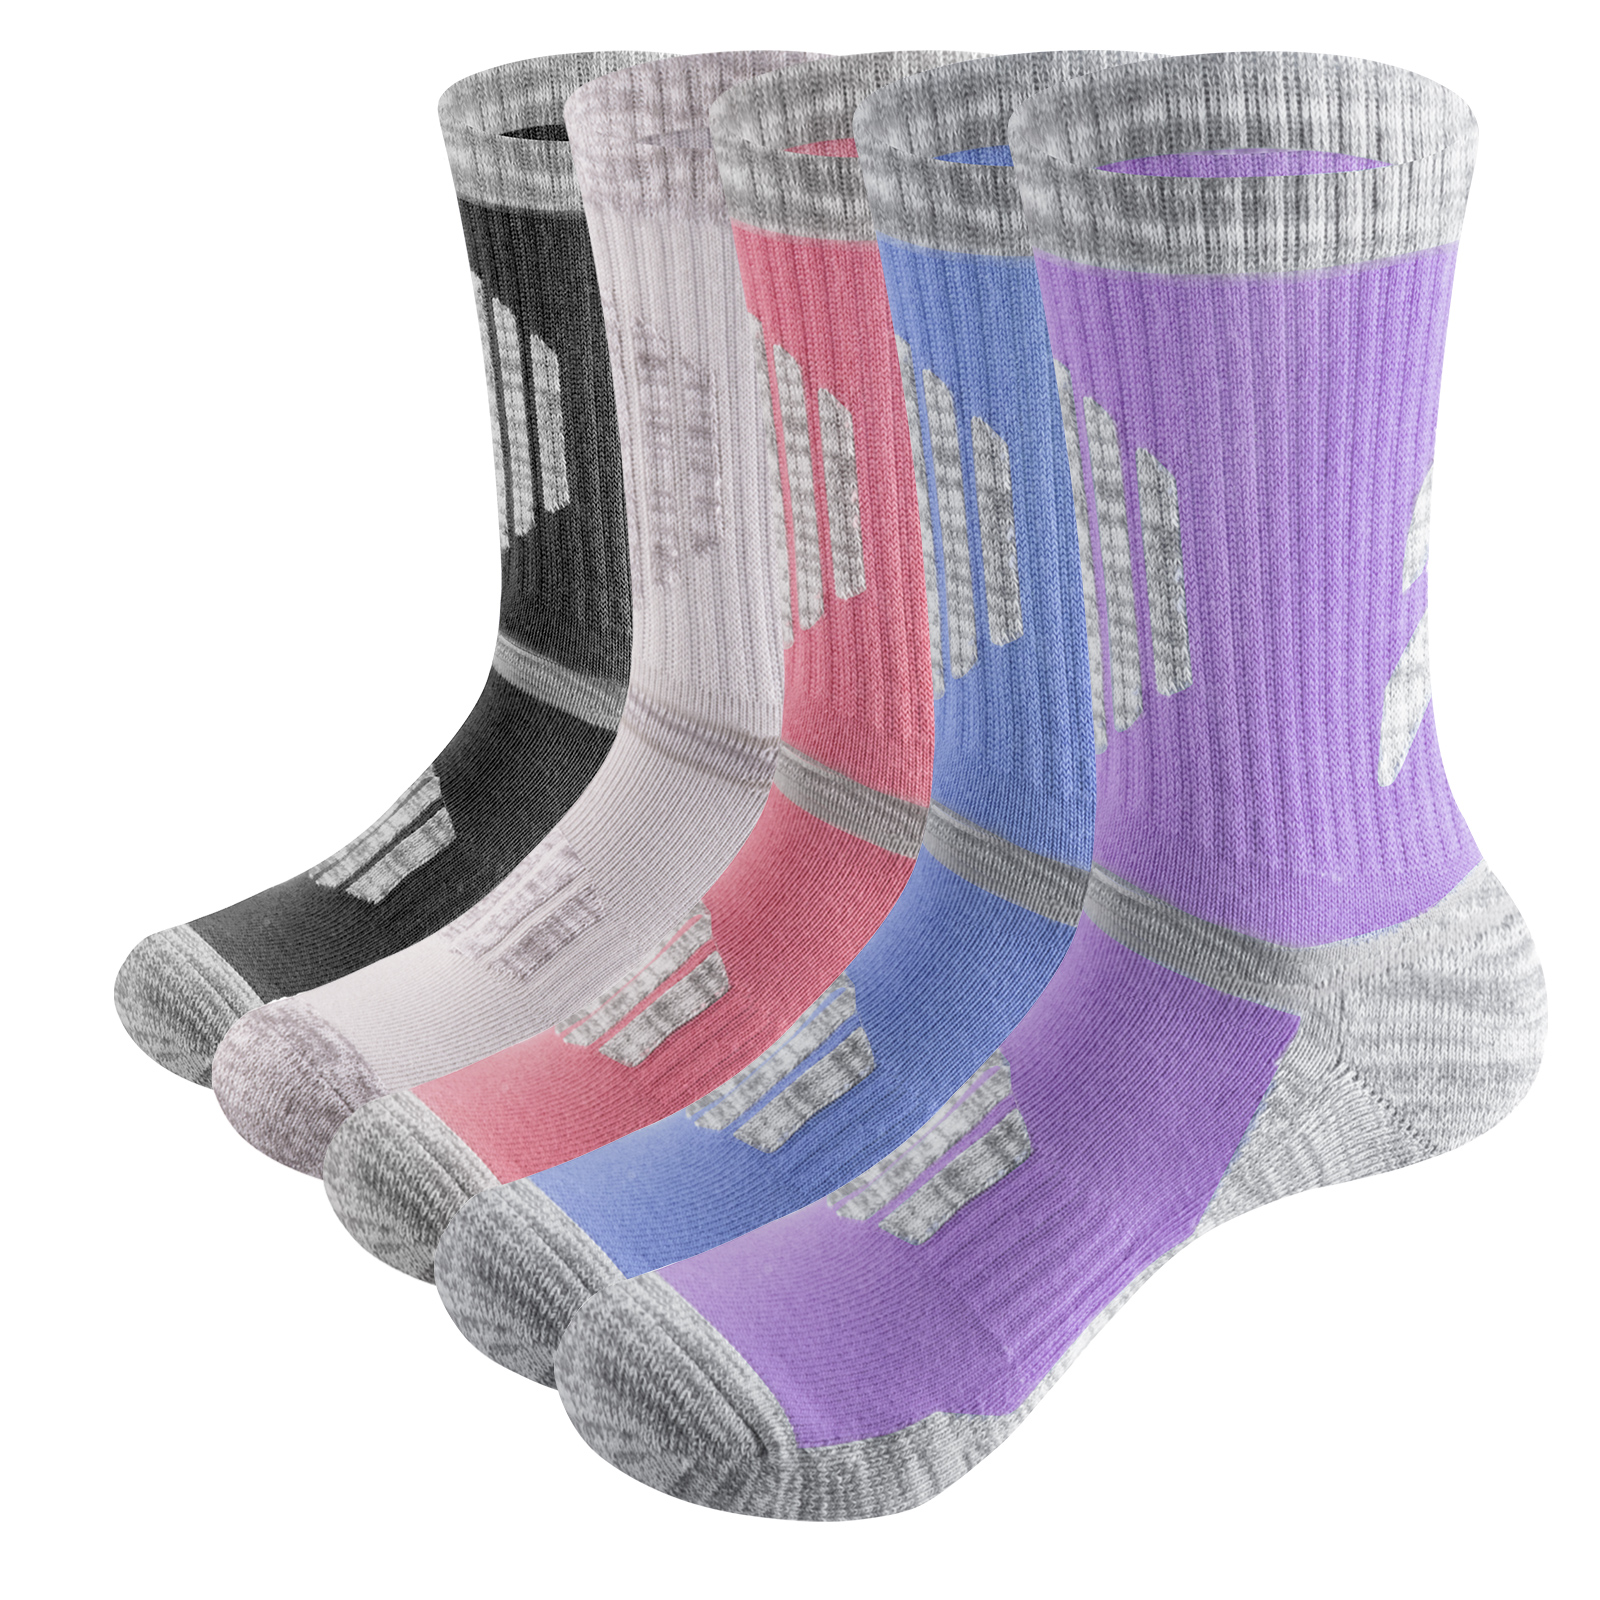 5PW2112 Womens Athletic Hiking Socks Camo Cotton Terry Cushioned Mid Calf Crew Socks For Women